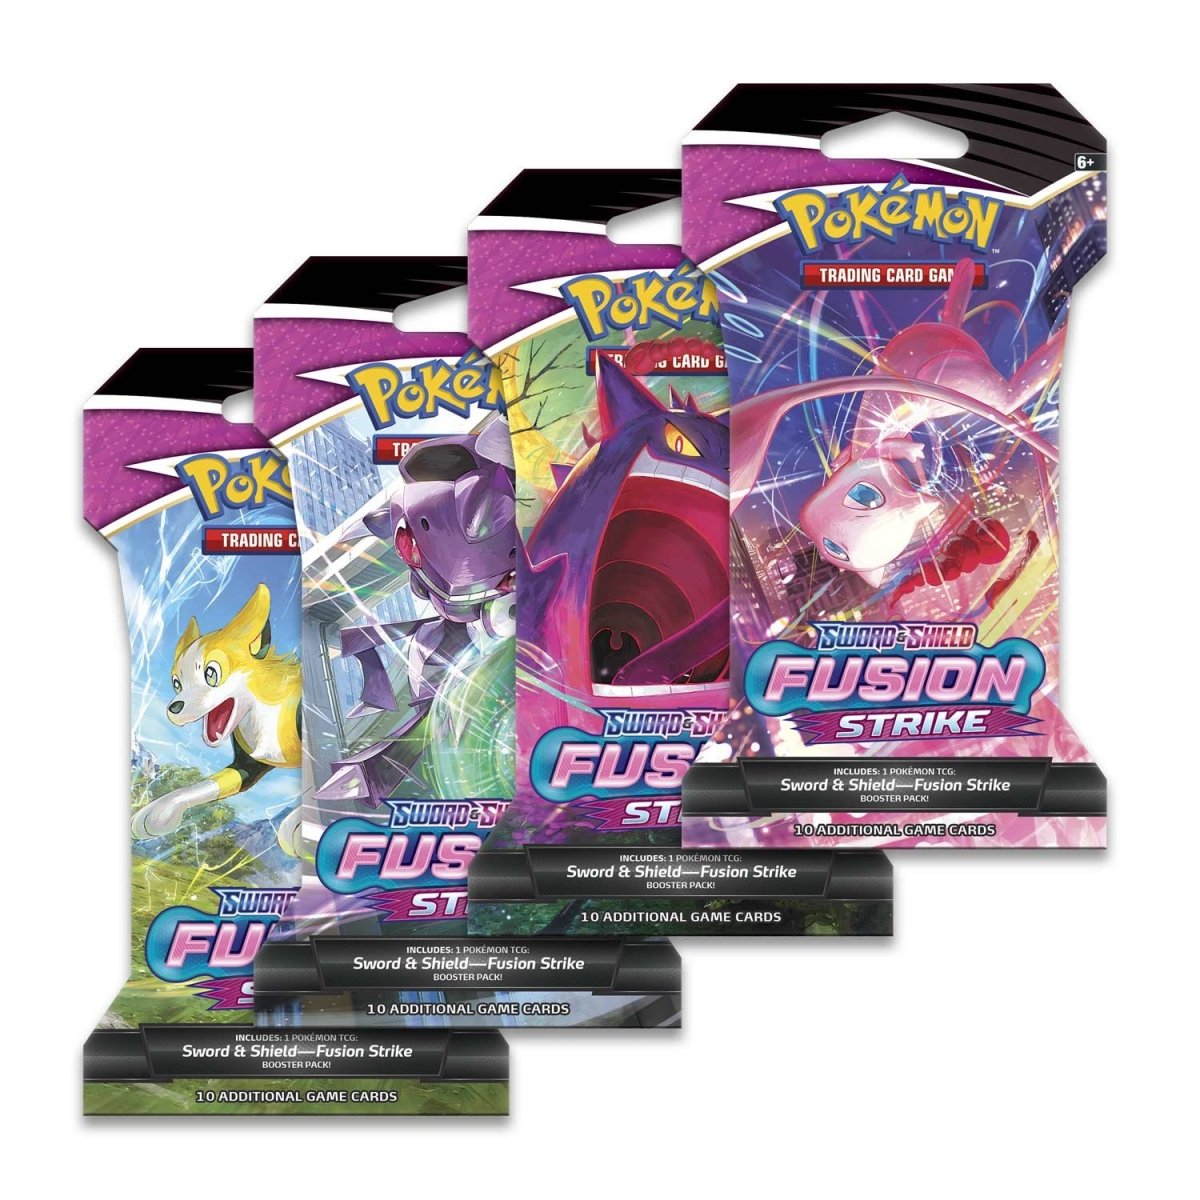 A visual representation of a Pokémon TCG: Sword & Shield—Fusion Strike Sleeved Booster Pack. It signifies the limitless potential of fusion strike styles with potent Pokémon V like Genesect V, Hoopa V, and Mew VMAX. The pack includes 10 trading cards and a basic energy card.